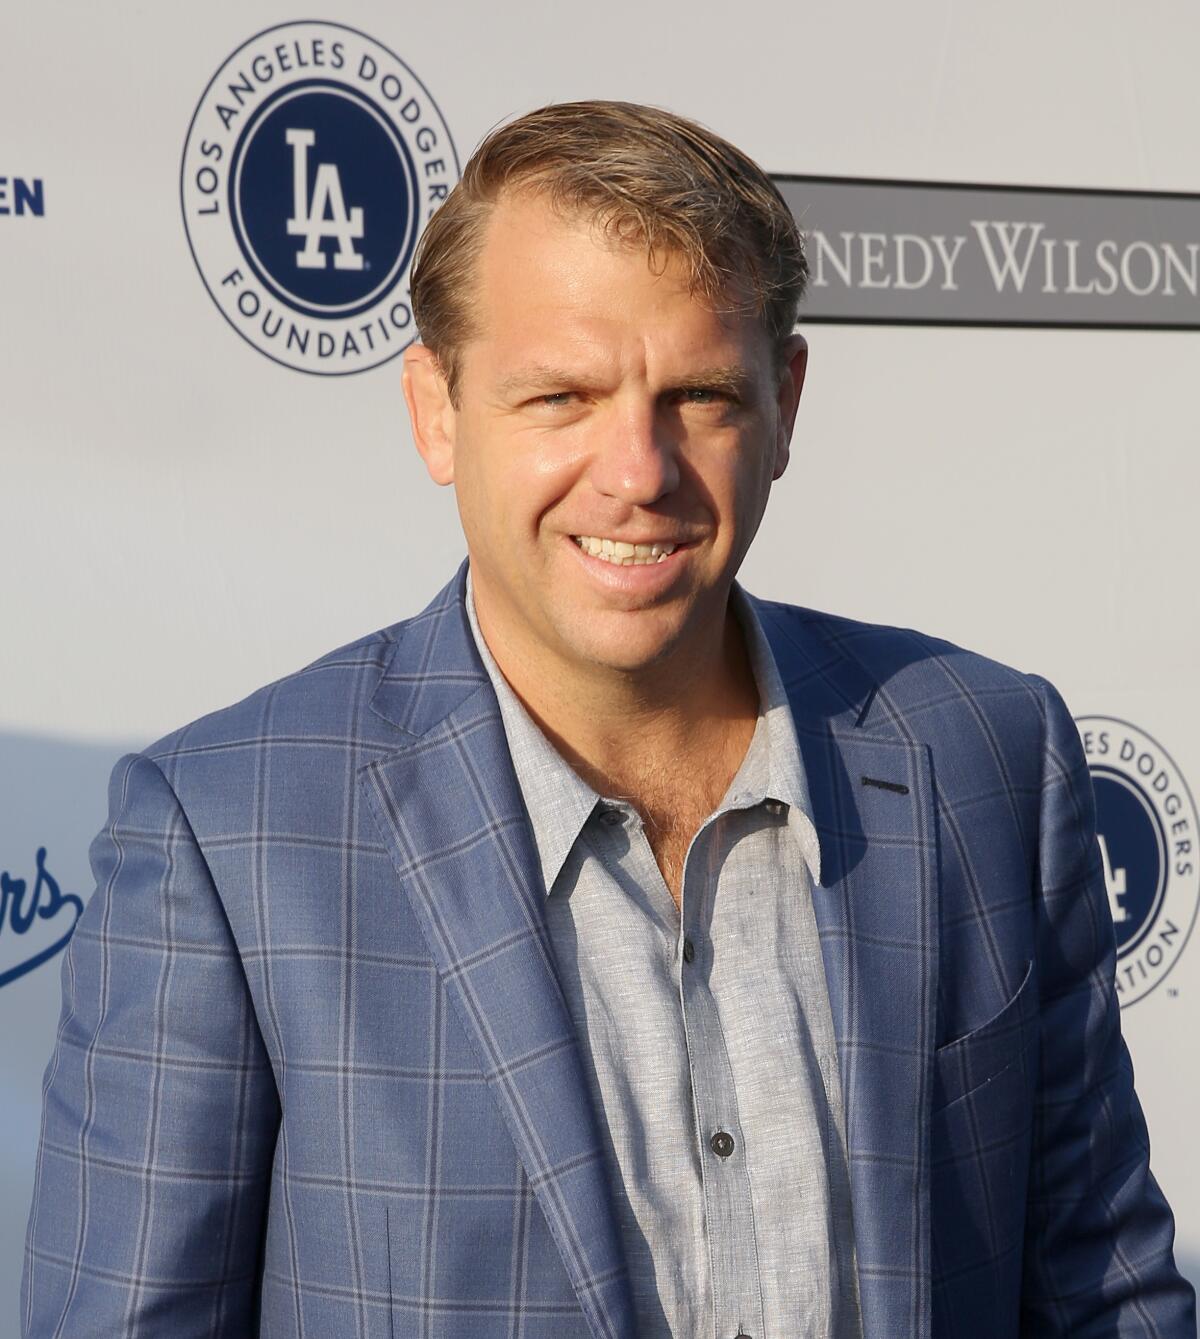 Todd Boehly, part owner of the Dodgers, attends the Los Angeles Dodgers Foundation Blue Diamond Gala.